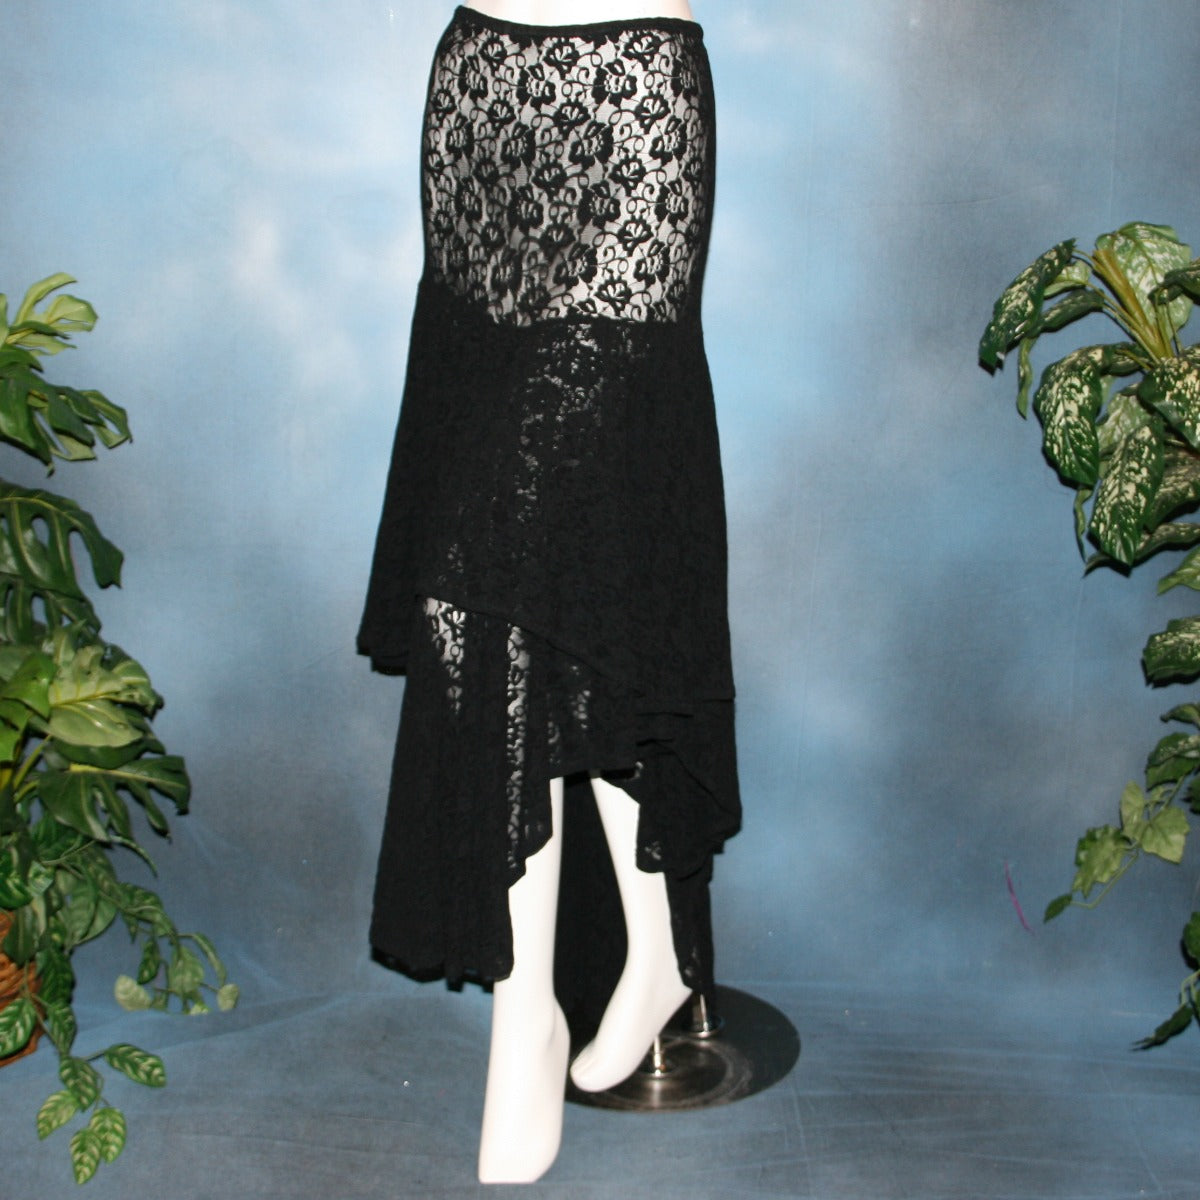 Crystal's Creations Black lace Latin/rhythm skirt, 2 tier style, was created with yards of back stretch lace, with 2 full circles cut with sides higher, back longer on a hip base.